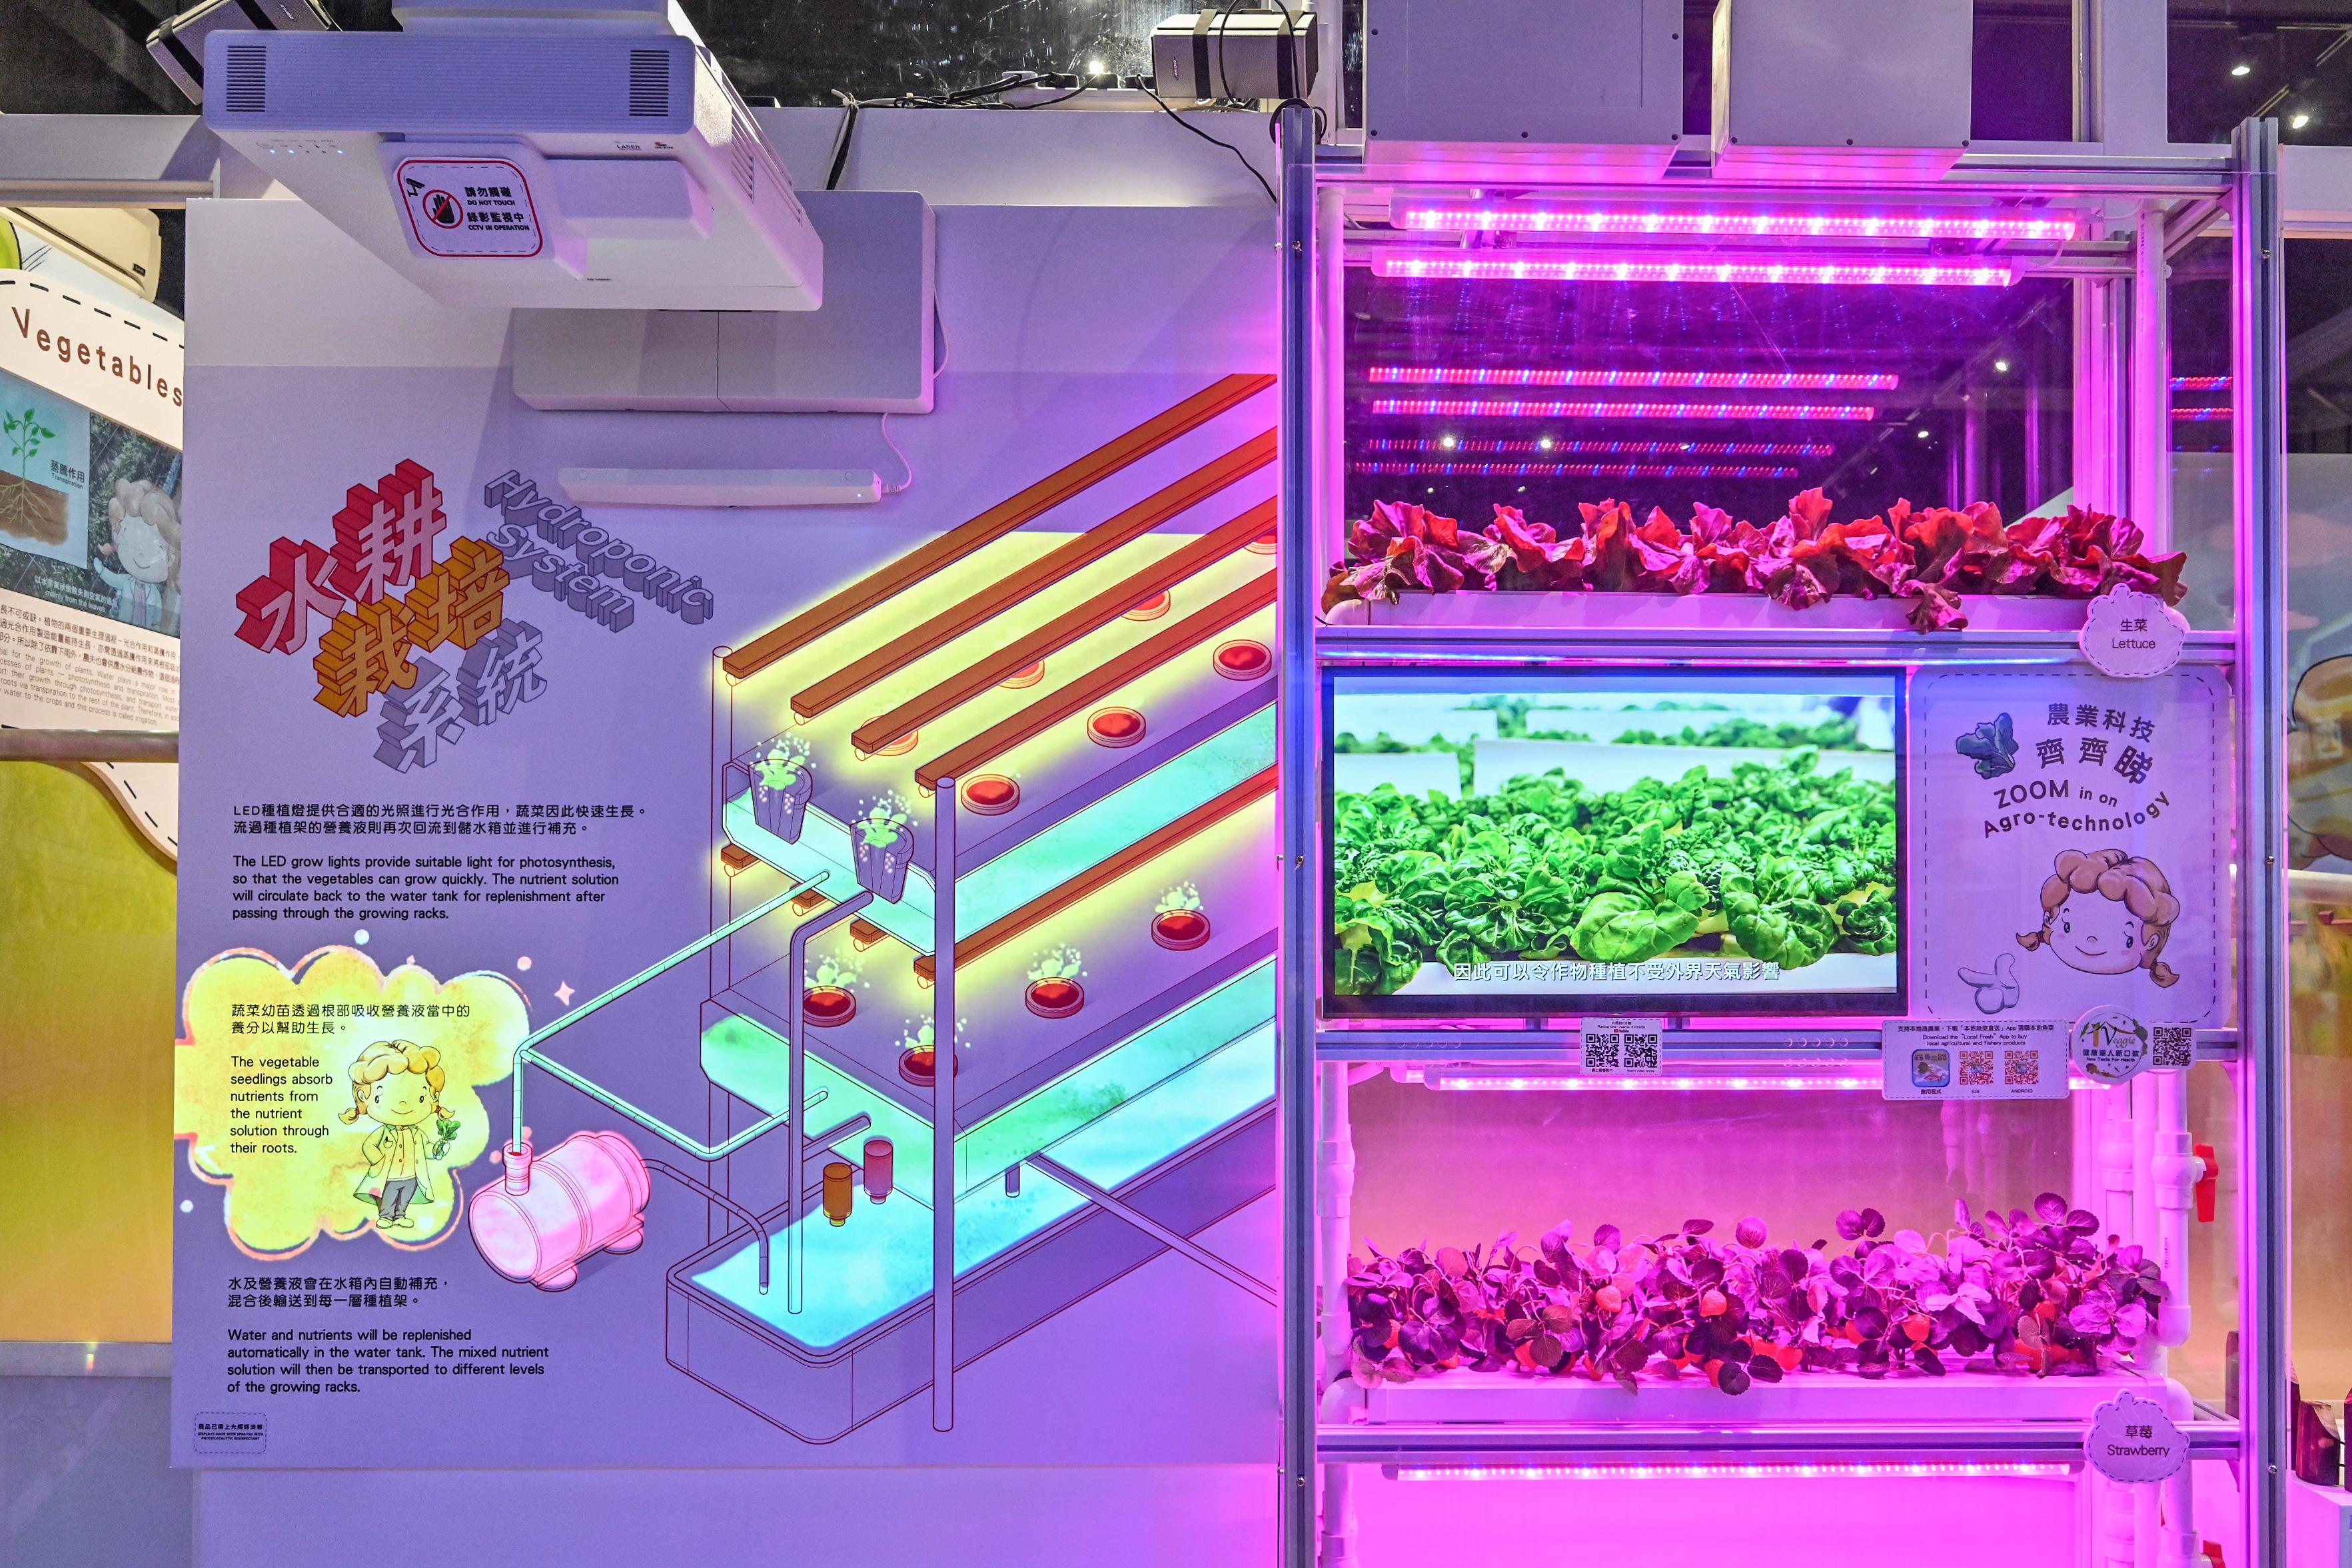 The Agriculture Hall of the Lions Nature Education Centre at Tsiu Hang, Sai Kung, will reopen tomorrow (December 22) upon completion of its revamping. Photo shows exhibits of indoor vertical hydroponic farming.